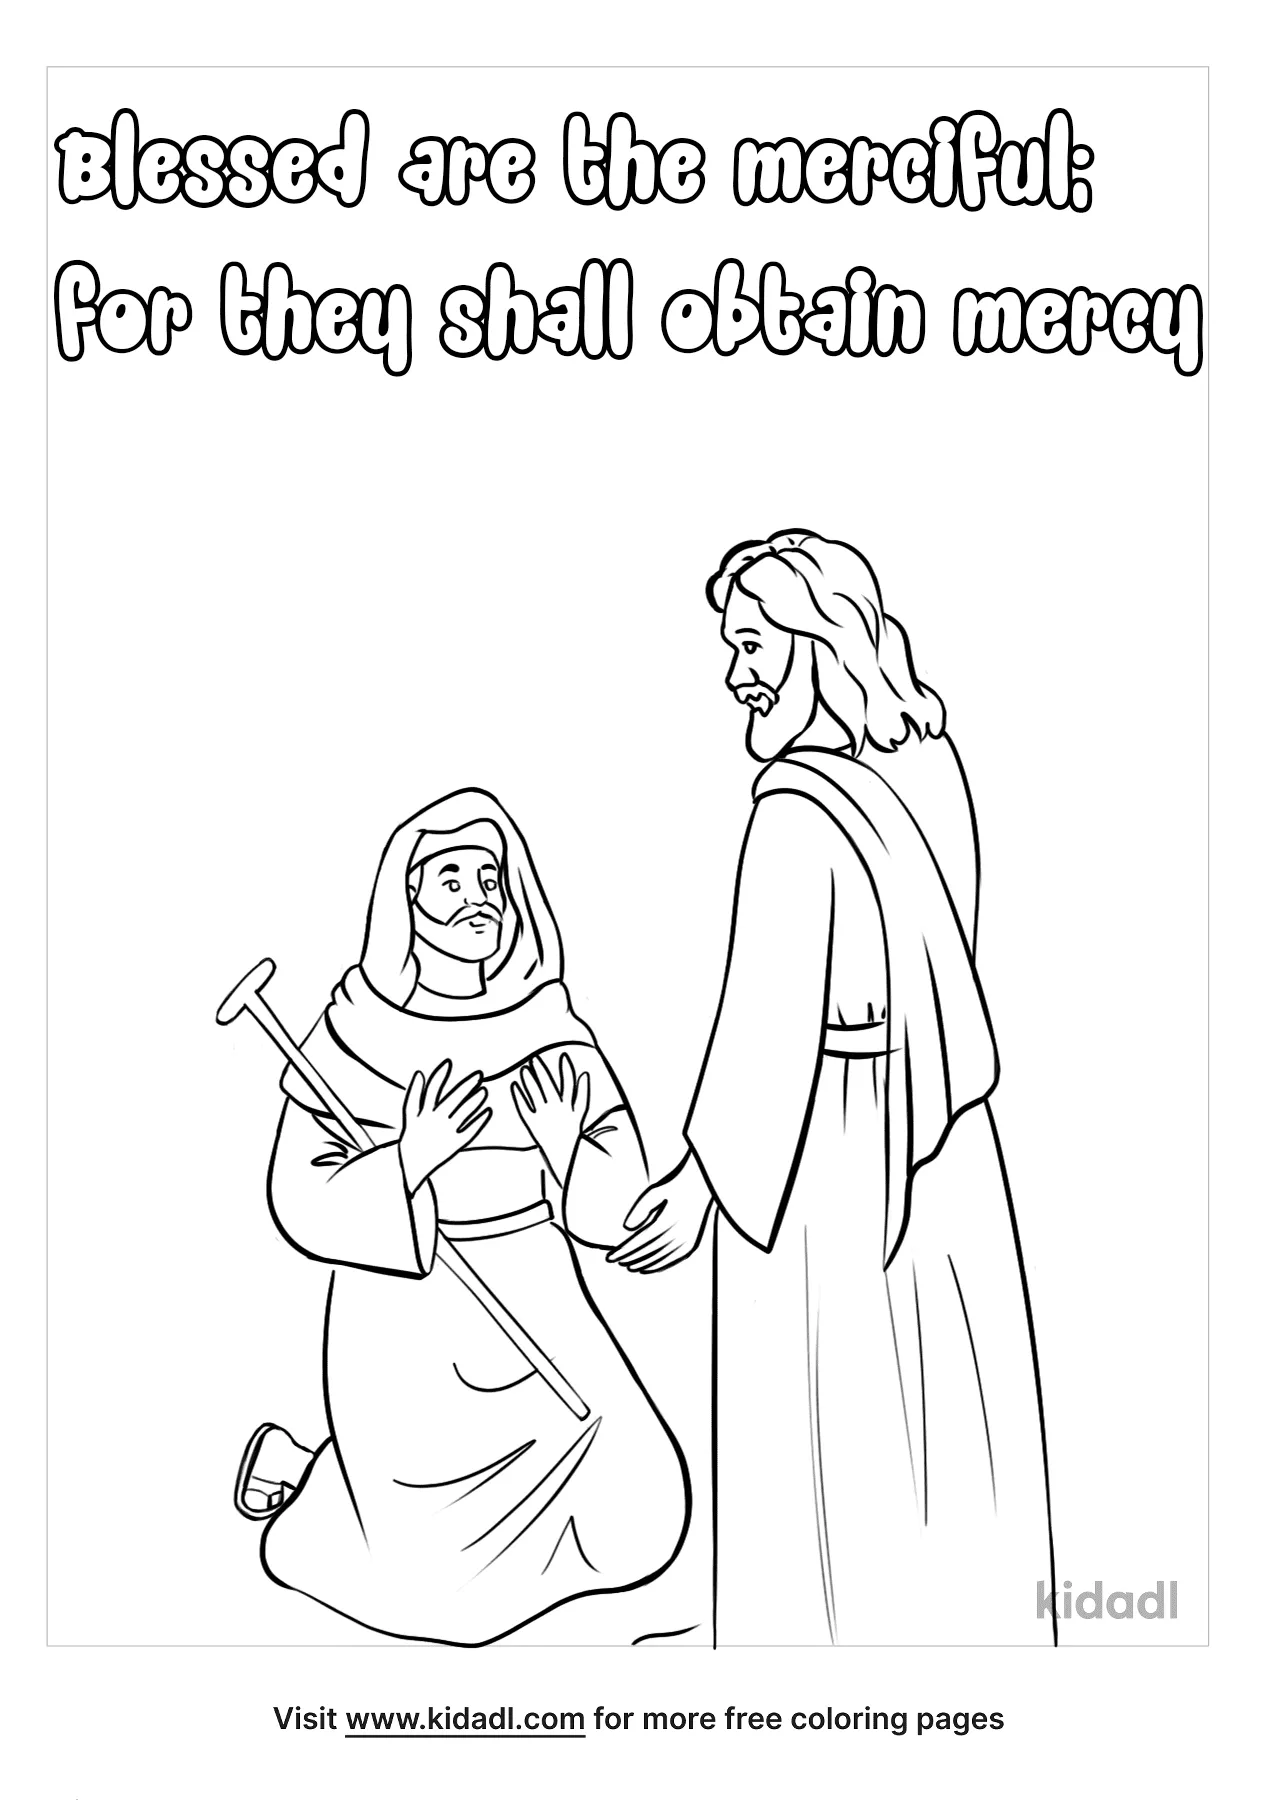 beatitudes for children coloring pages